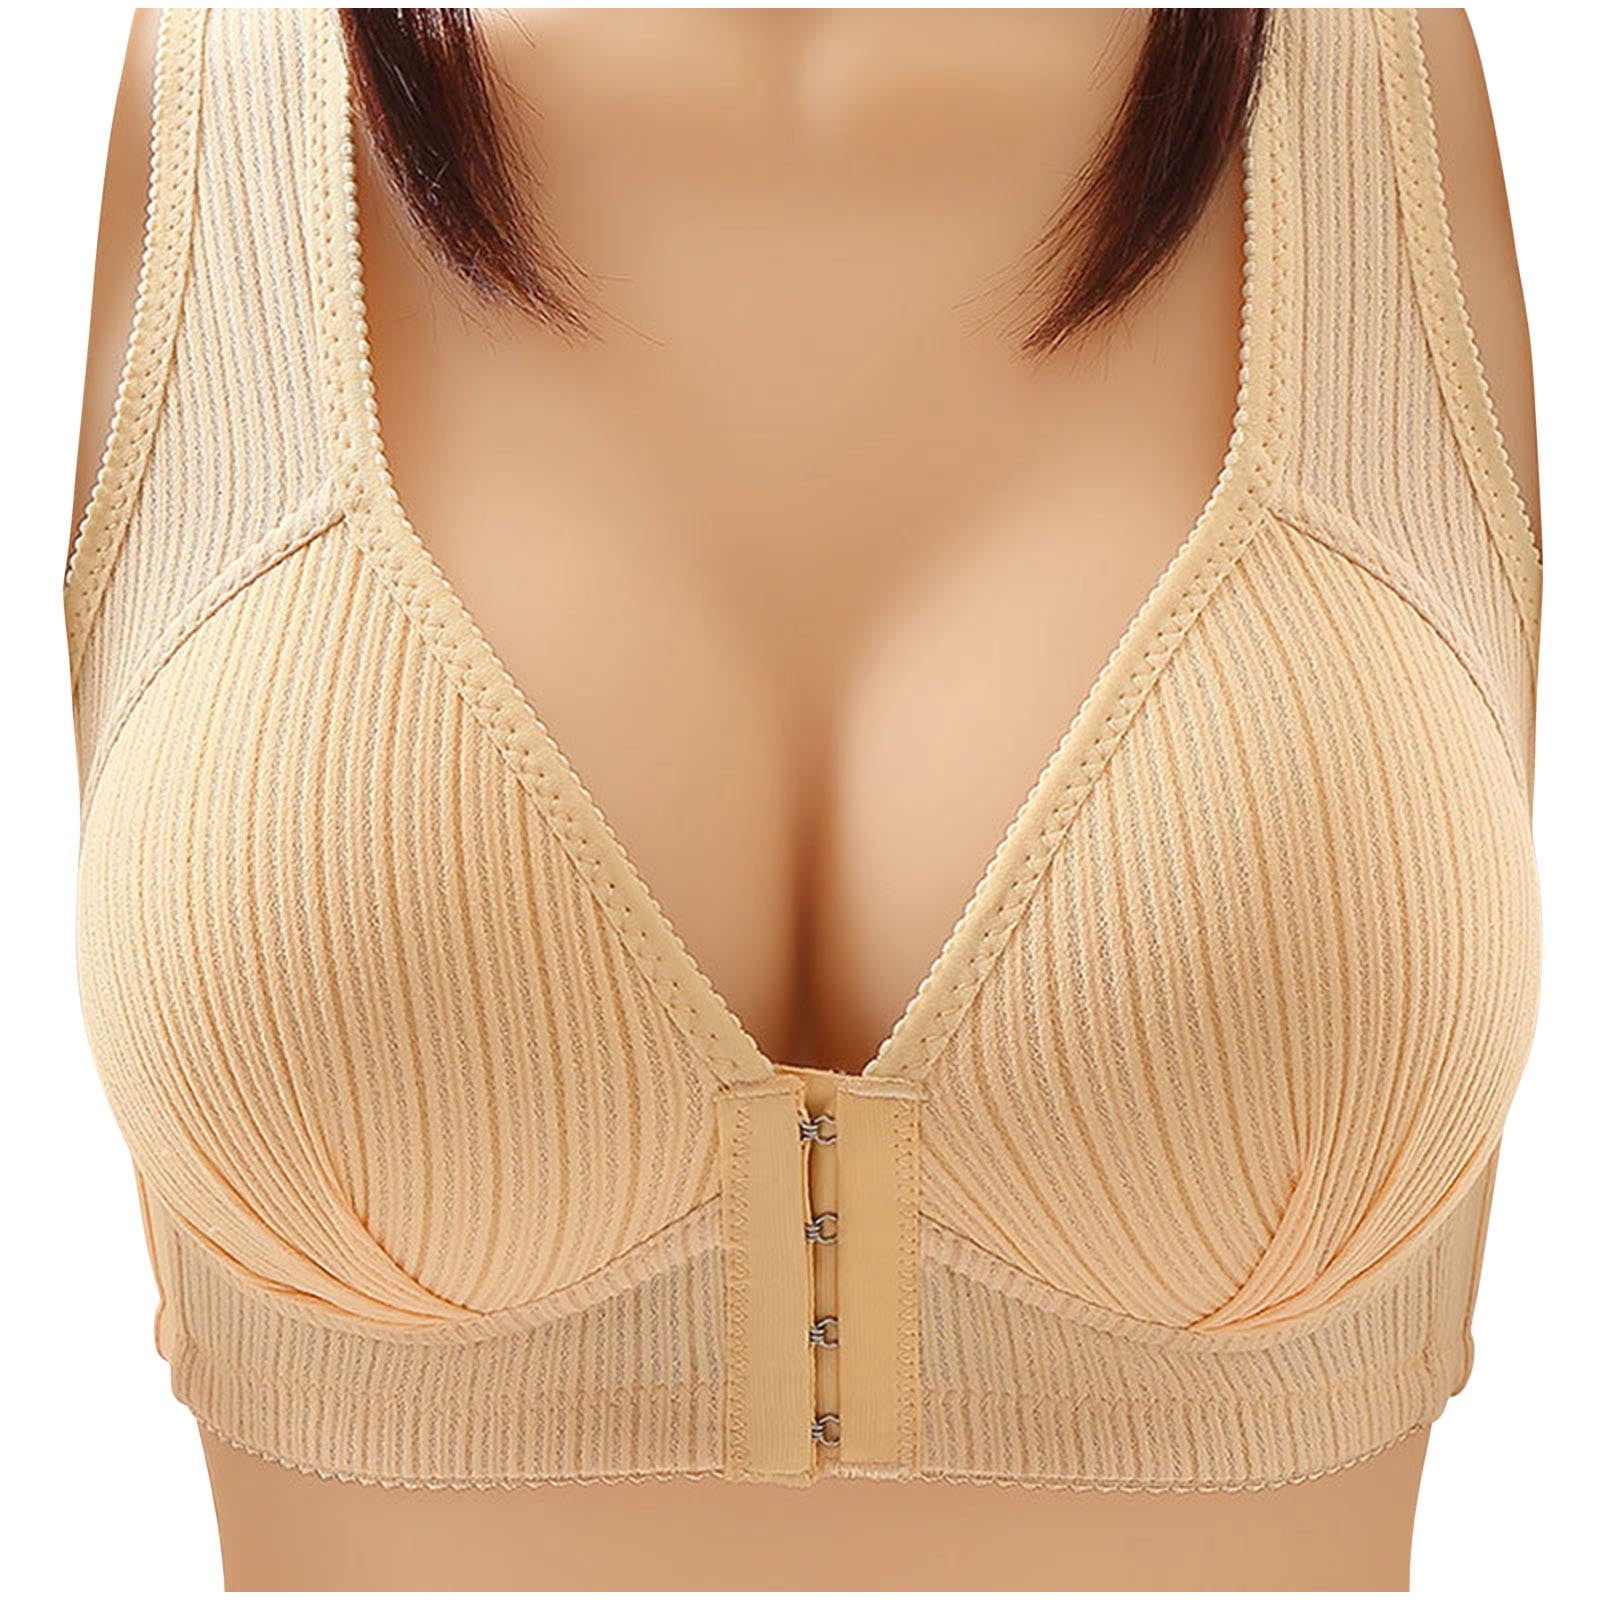 YWDJ Bras for Women Push Up No Underwire Plus Size Front